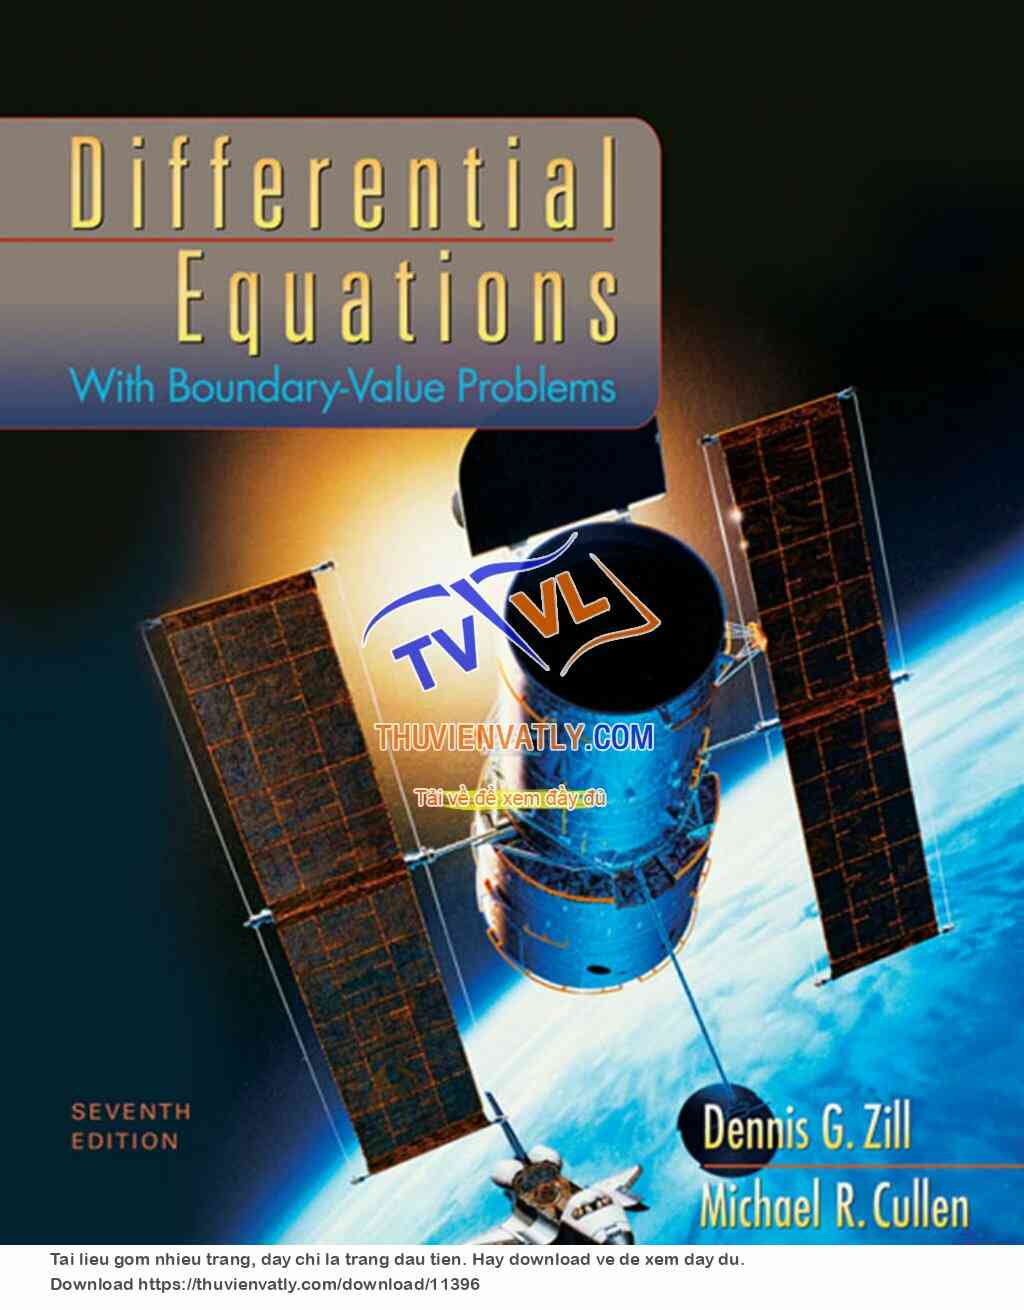 Differentials Equations with Boundary-Value Problems